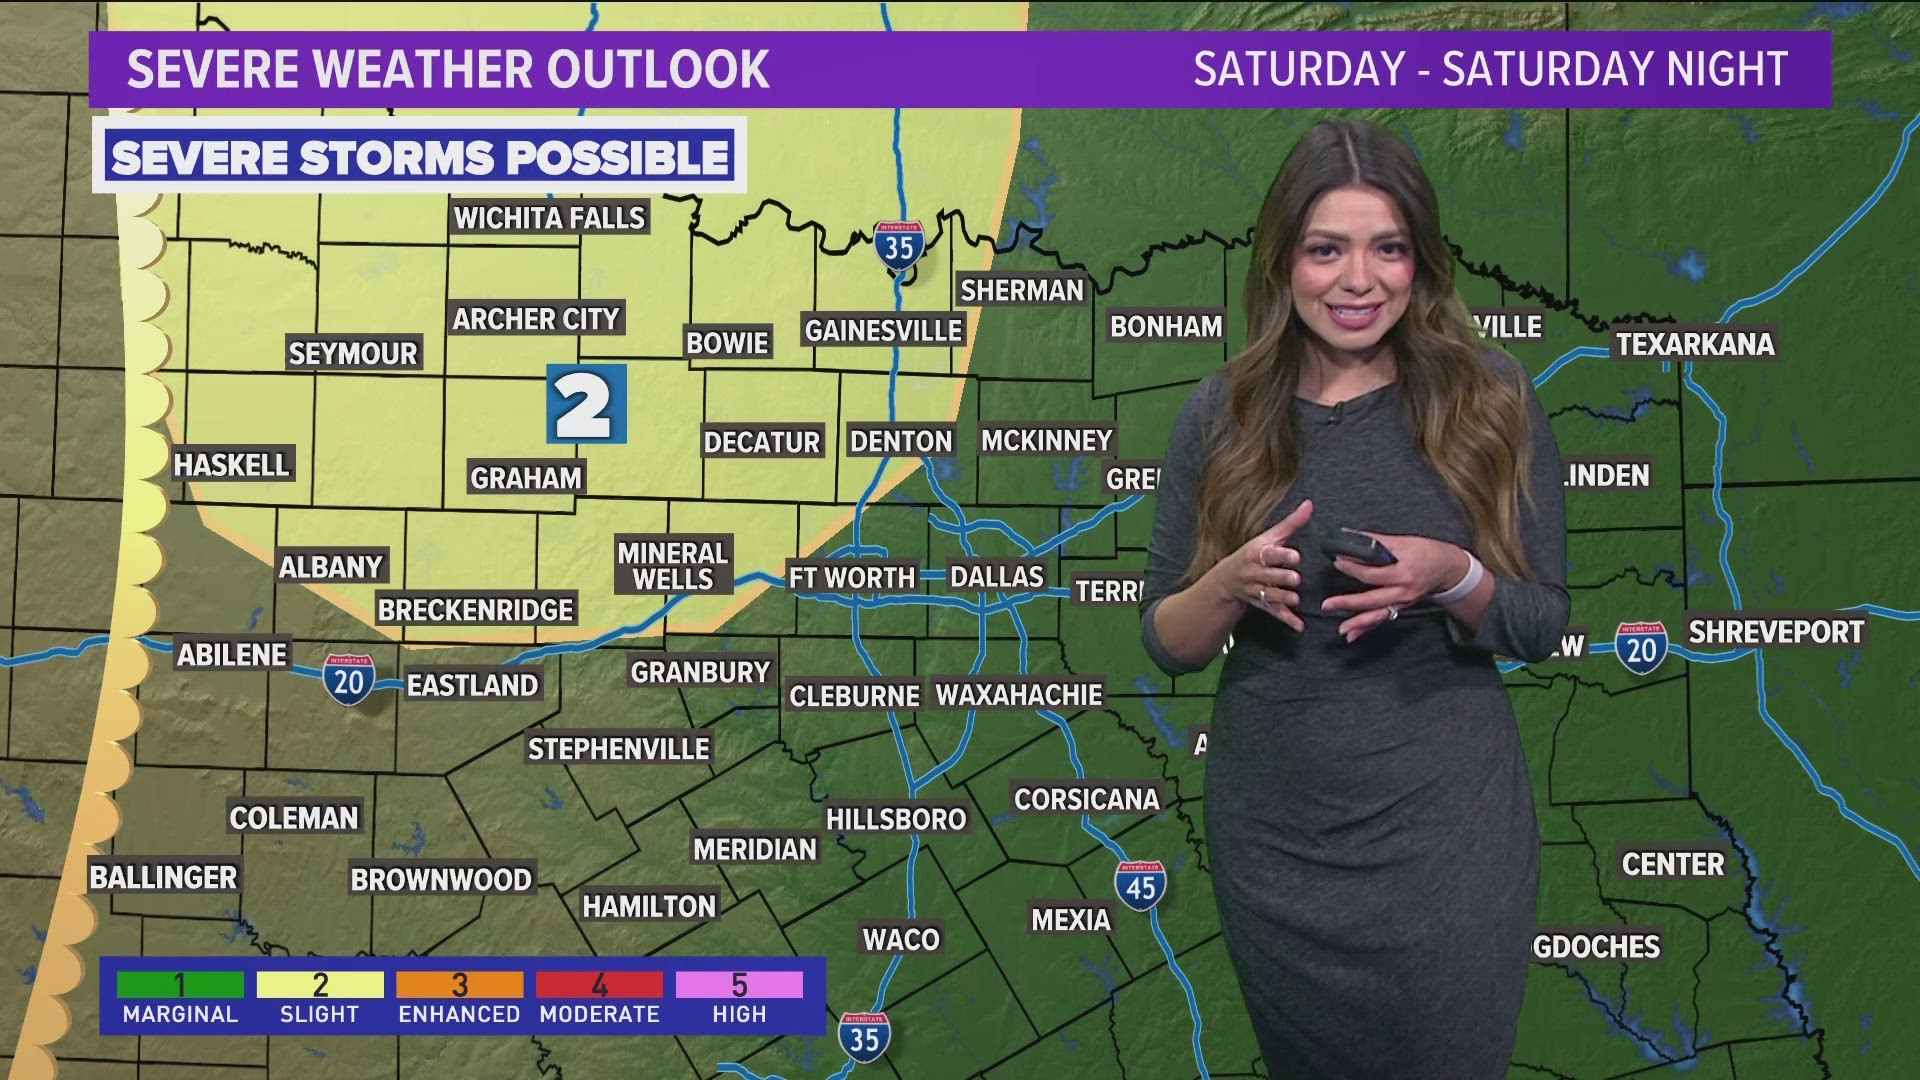 DFW Weather: Warmer weather the rest of the week. Storms this weekend!